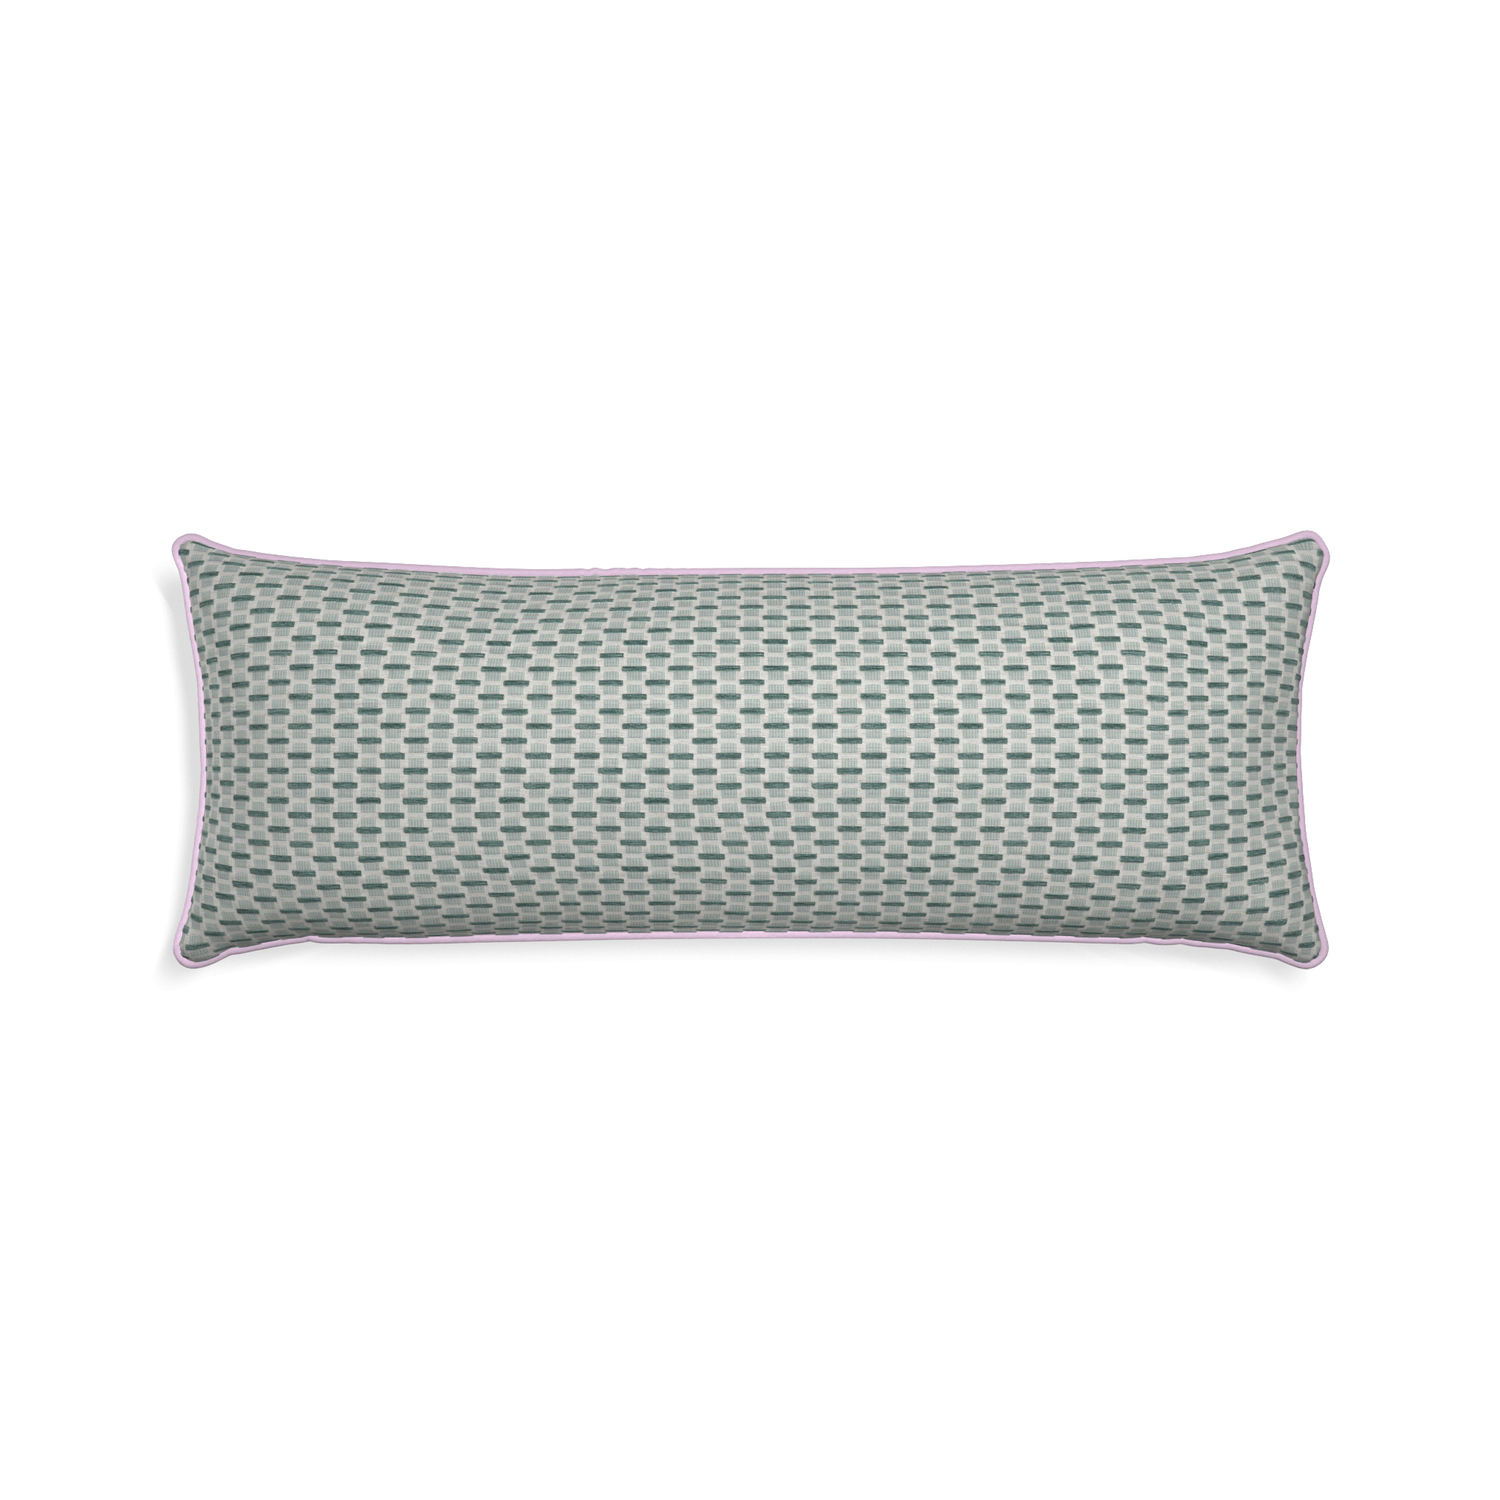 Xl-lumbar willow mint custom green geometric chenillepillow with l piping on white background